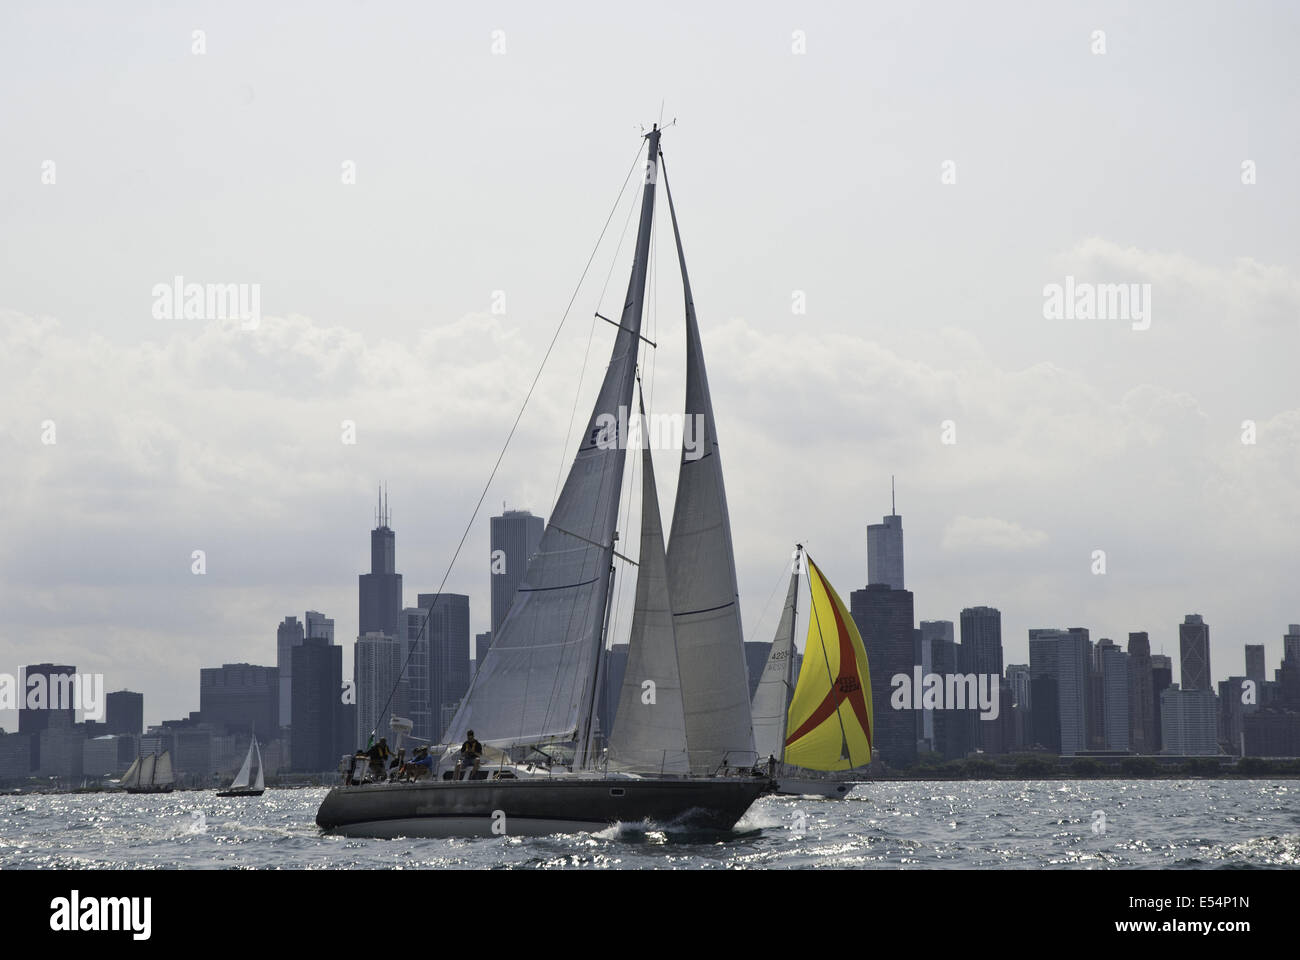 Chicago, IL, USA. 18th July, 2014. Cruising fleets of the Race to Mackinac began their333 mile journey on Friday July 18, 2014. More than 300 boats are entered in this 106th running of Race. The time lapse record was set by Roy Disney's boat Pyewacket in 2002. © Karen I. Hirsch/ZUMA Wire/ZUMAPRESS.com/Alamy Live News Stock Photo